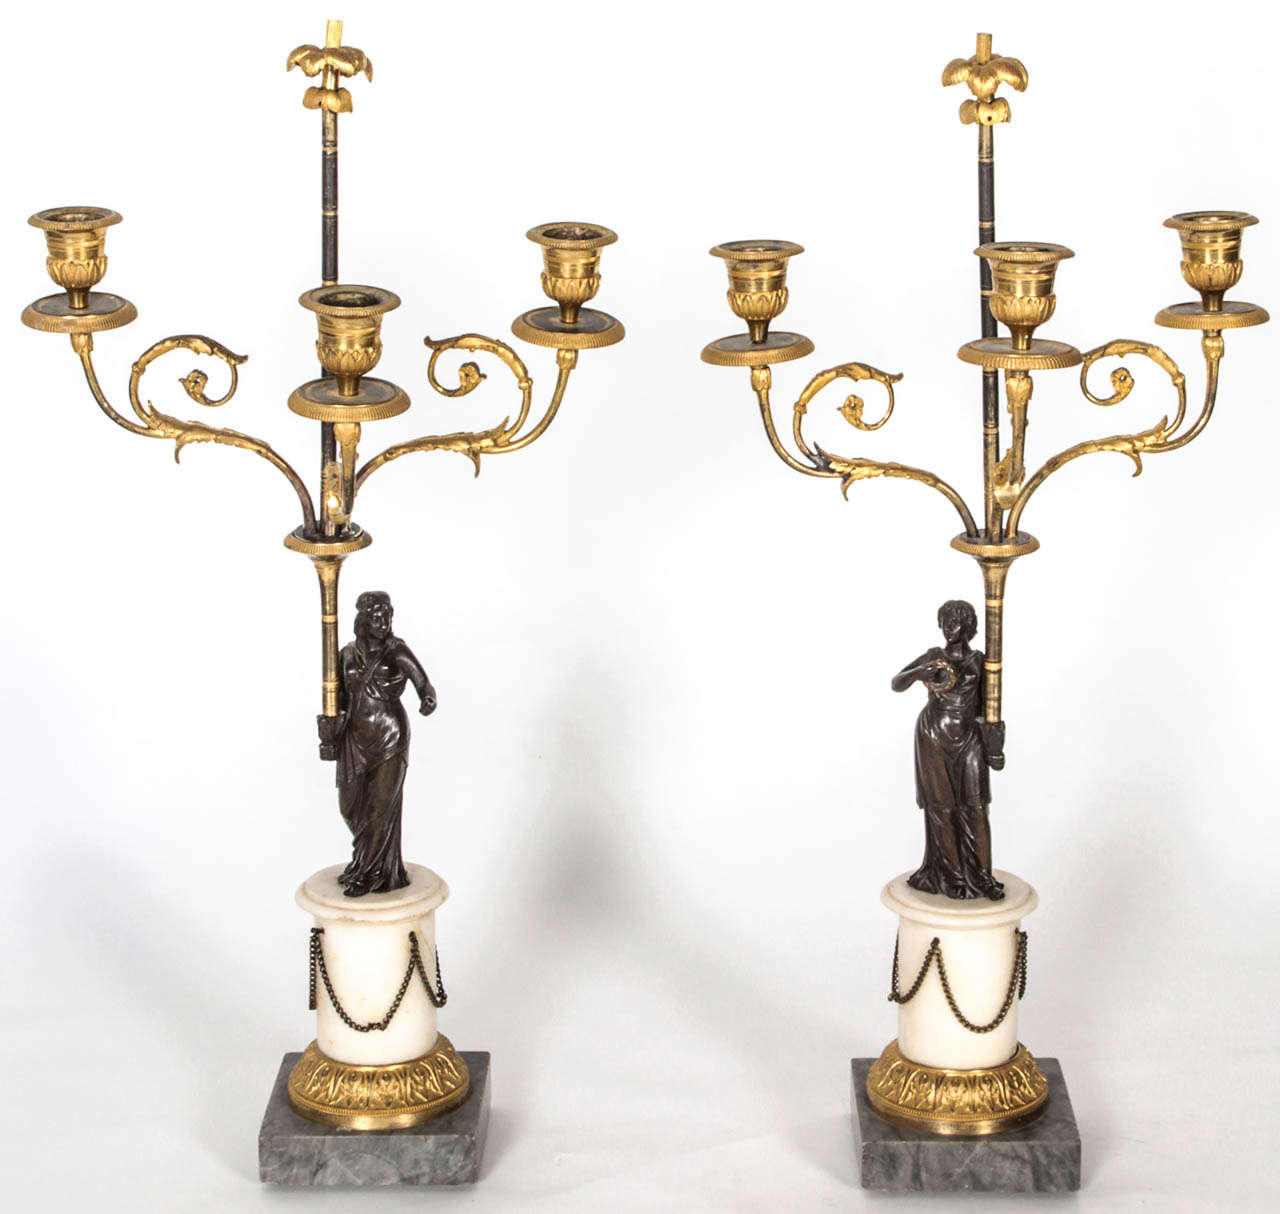 Pair of ormolu gilded and bronze three-armed candelabra.